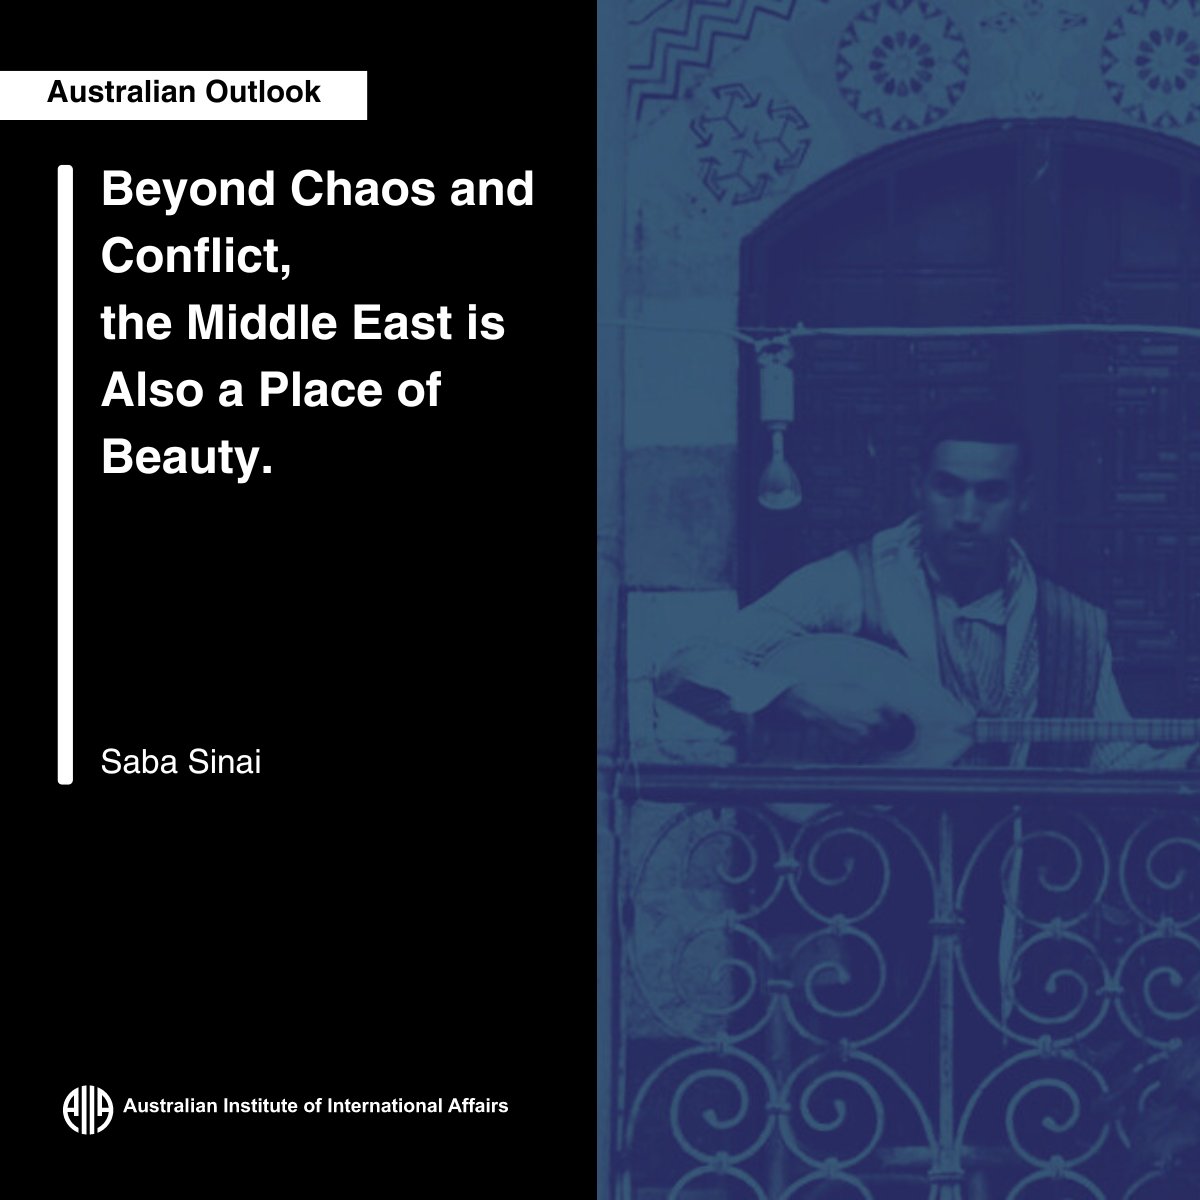 “We shouldn’t forget that the region hosts a rich history and a vibrant cultural and intellectual life,” discussed by Saba Sinai Read more at Australian Outlook👇 ow.ly/fO4i50R8STm